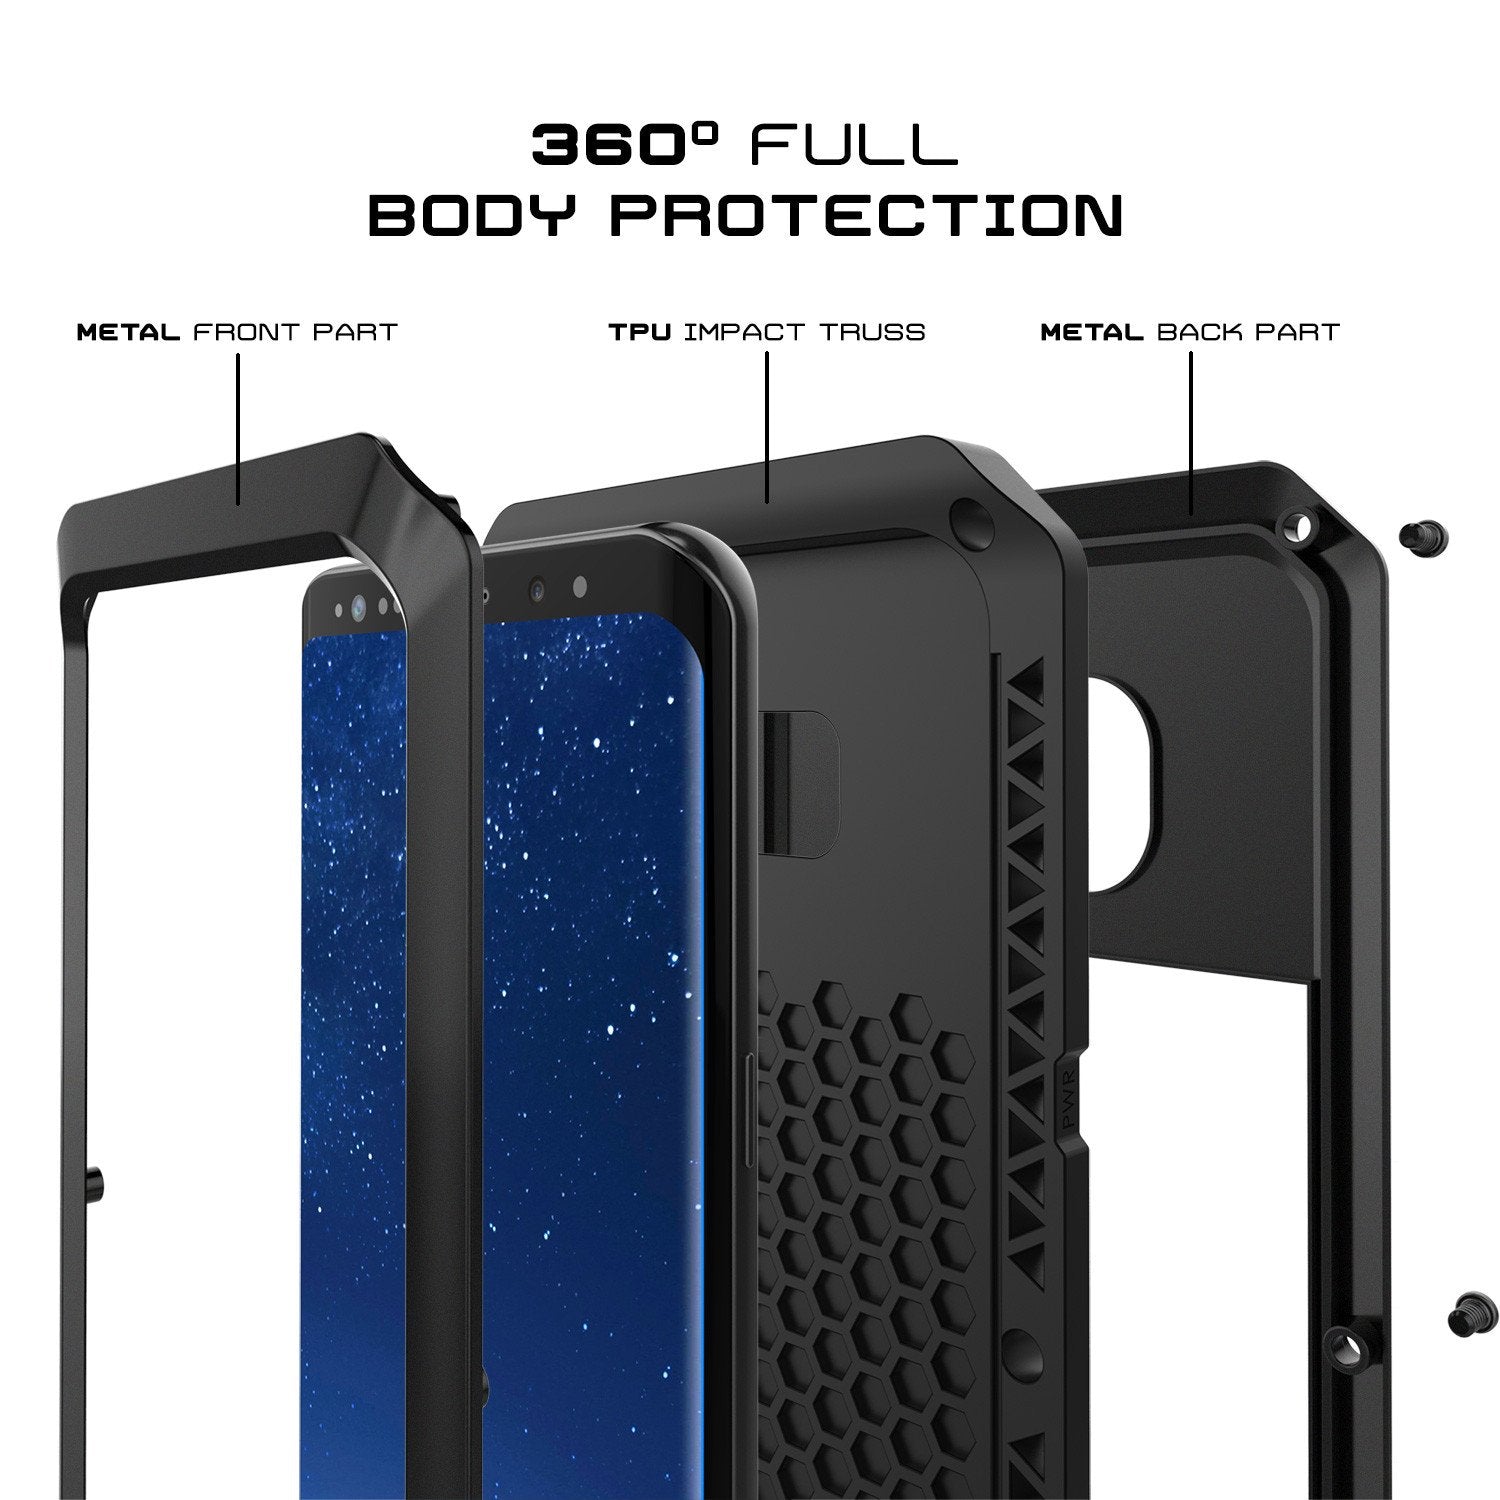 Galaxy S8+ Plus Metal Case, Heavy Duty Military Grade Rugged Armor Cover [shock proof] W/ Prime Drop Protection [BLACK]